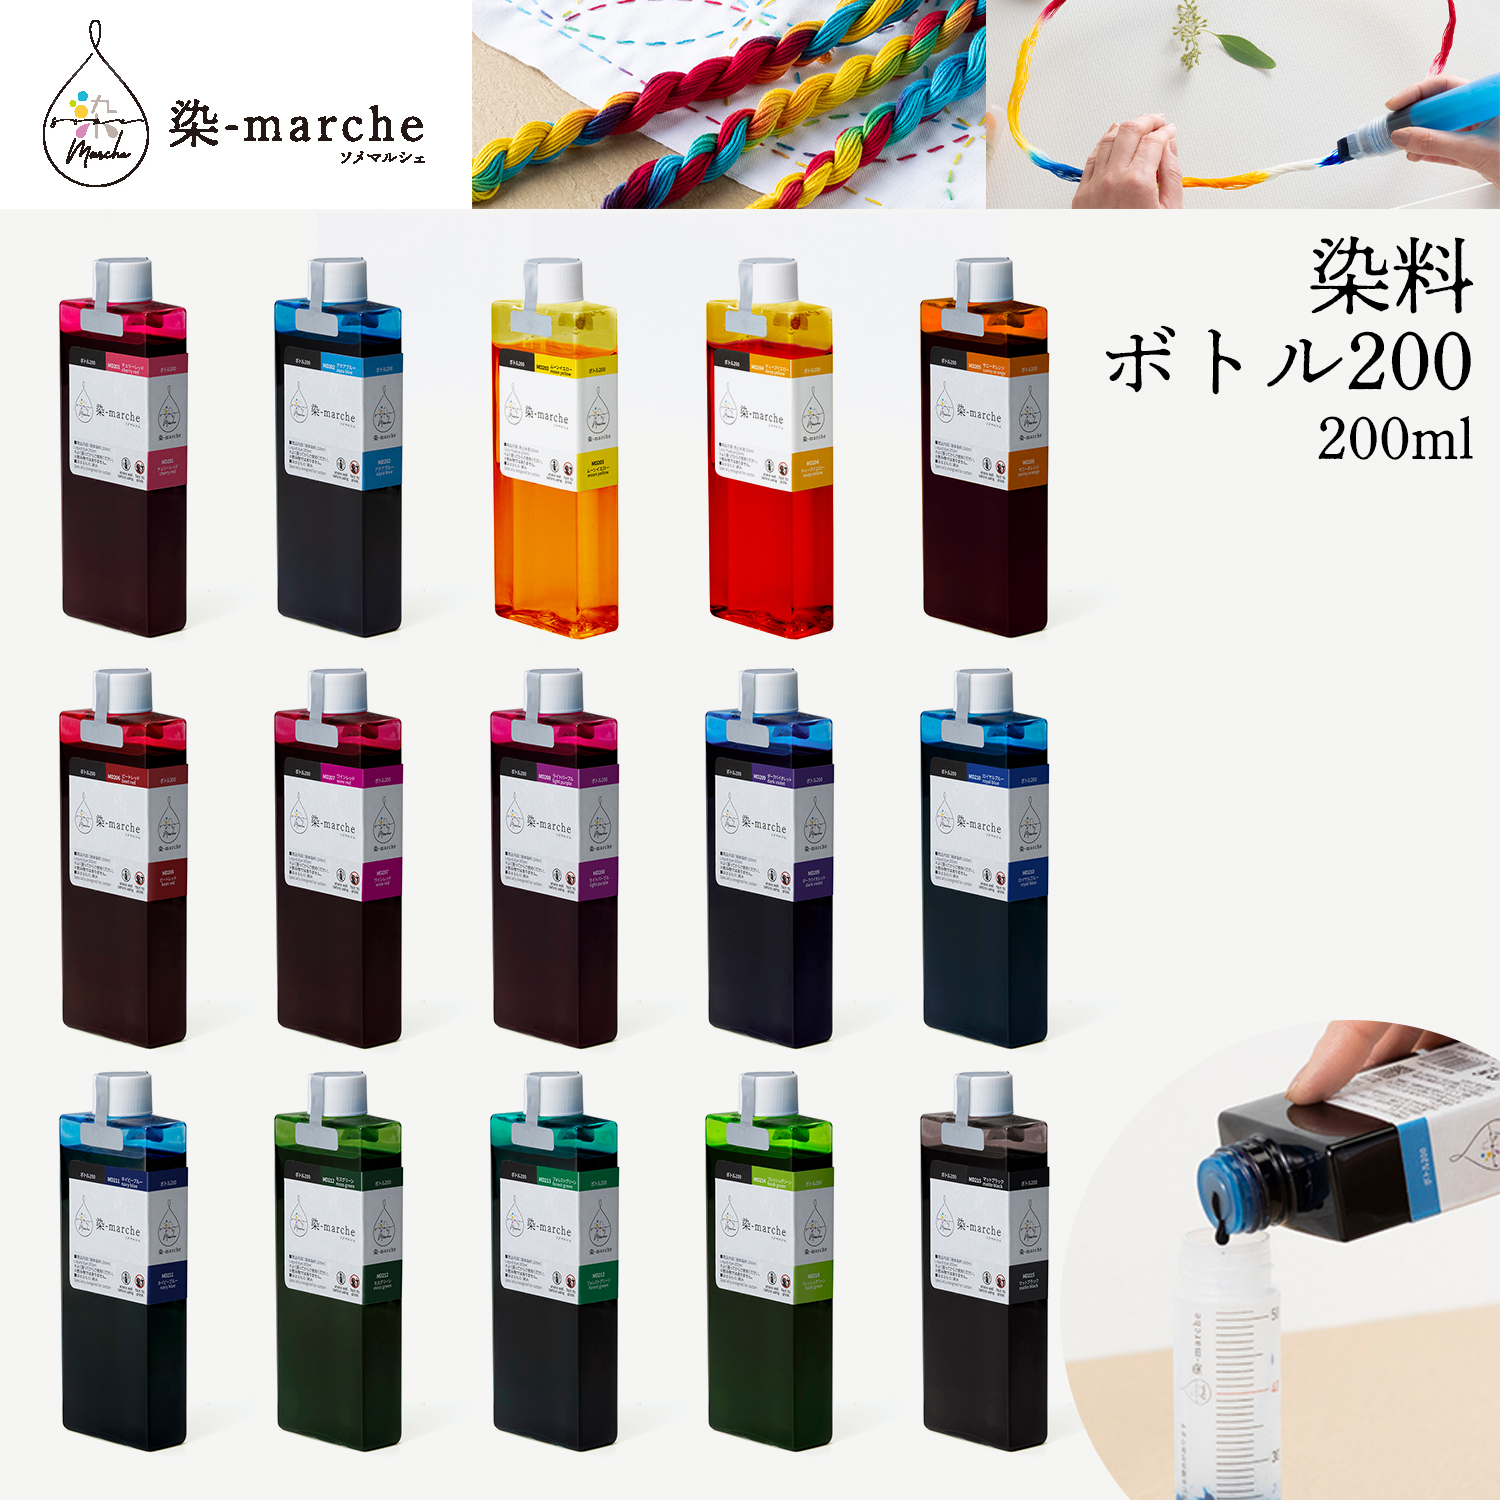 [Order upon demand", not returnable]OLY-MD201 "Some-marche" Bottle 200 200ml 3 piece unit (pcs)